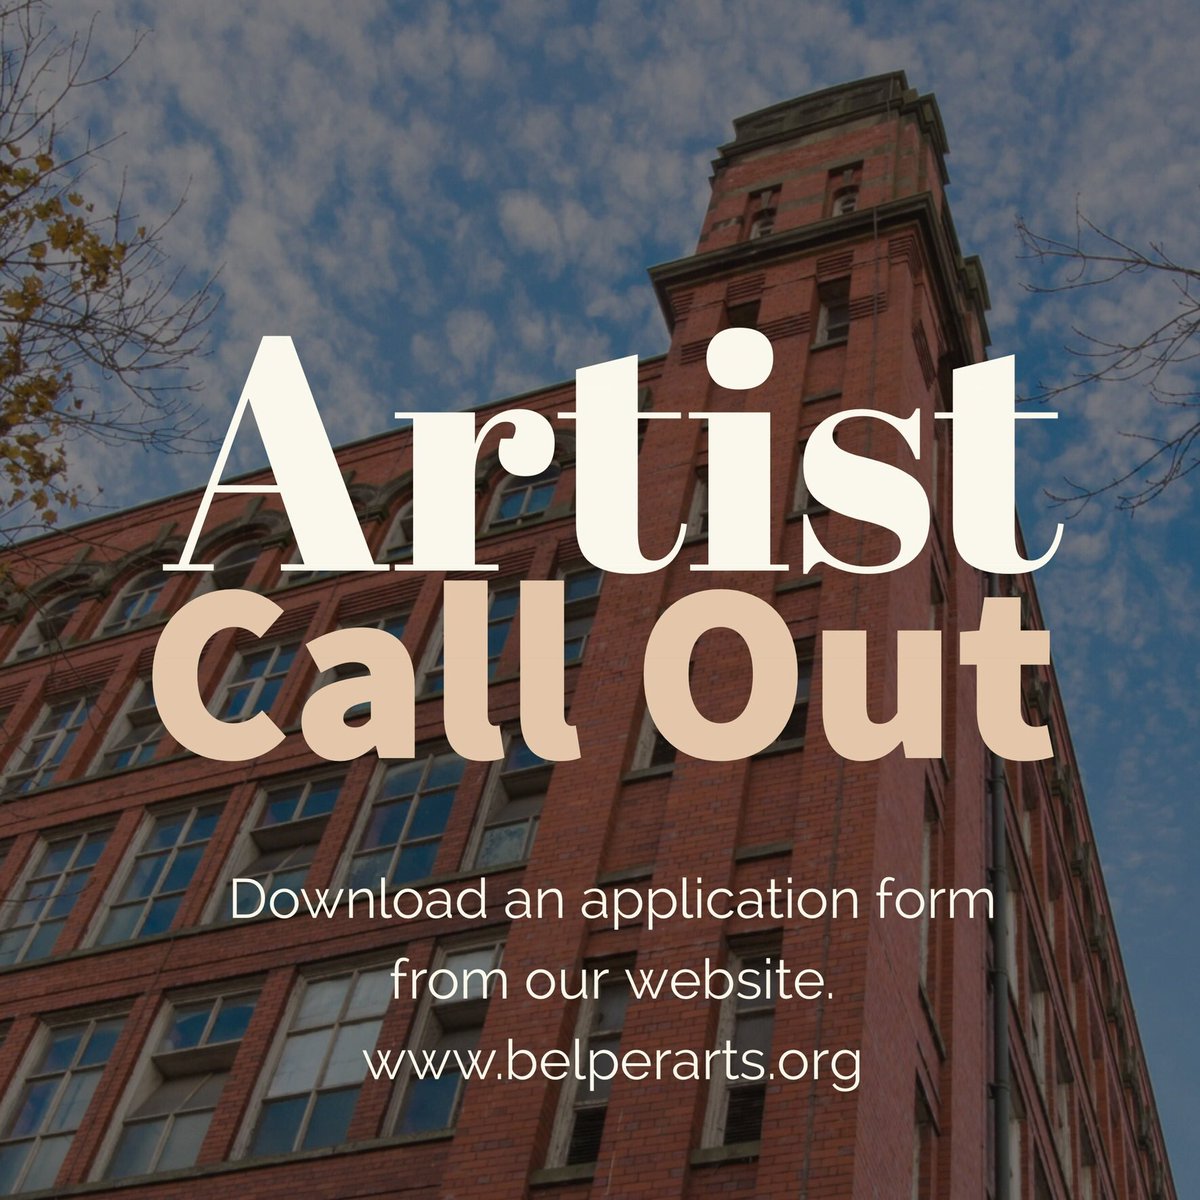 Artist Call Out. 
If you would like to take part in this years Belper Arts Trail please do get those applications in before 31st January. Don’t miss out. You can download an application form direct from the website. belperarts.org #Belper #artistcallout #madeinderbyshire